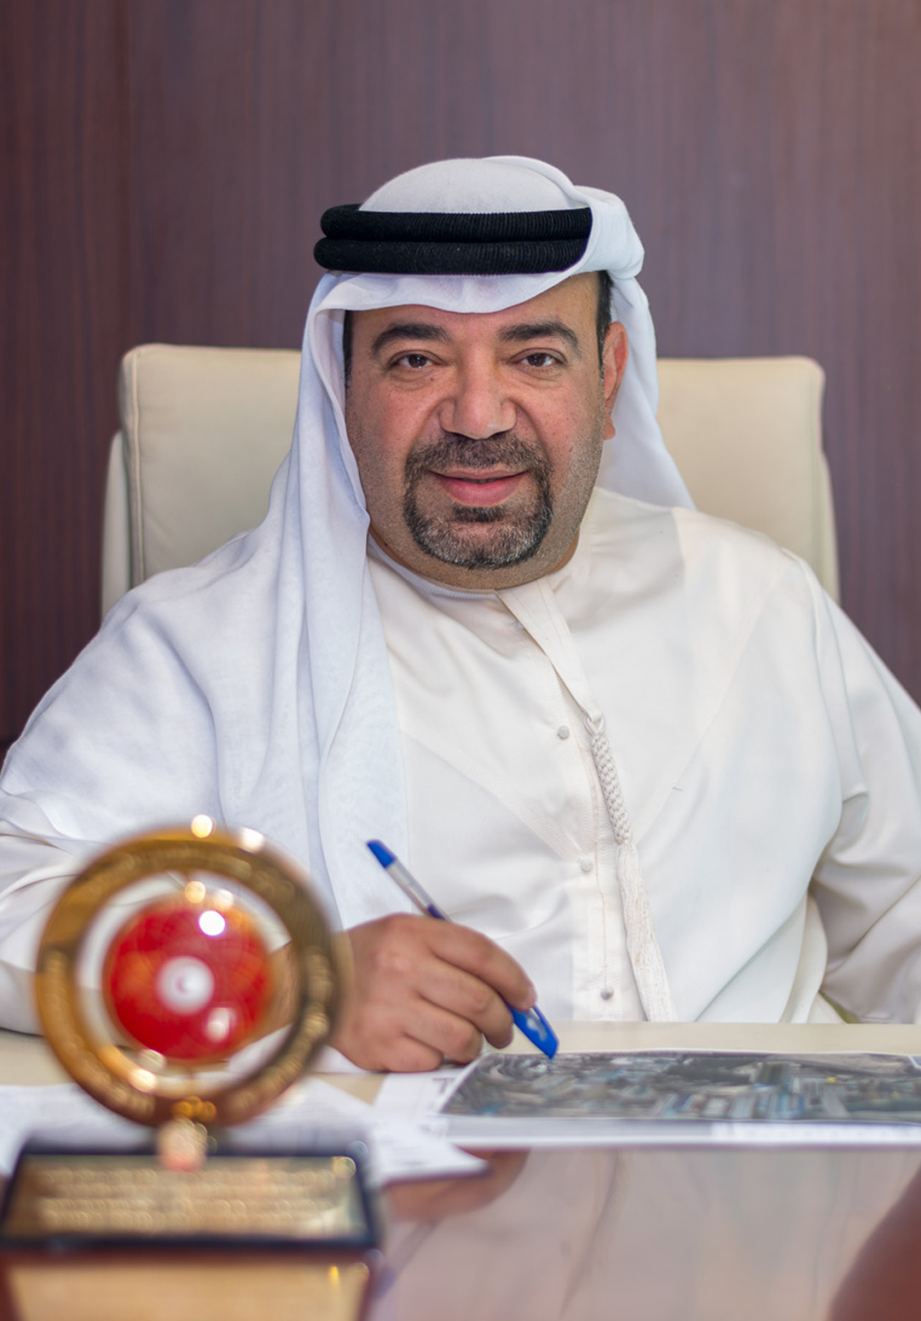 Central Hotels Gears Up for a Strong Presence at Arabian Travel Market